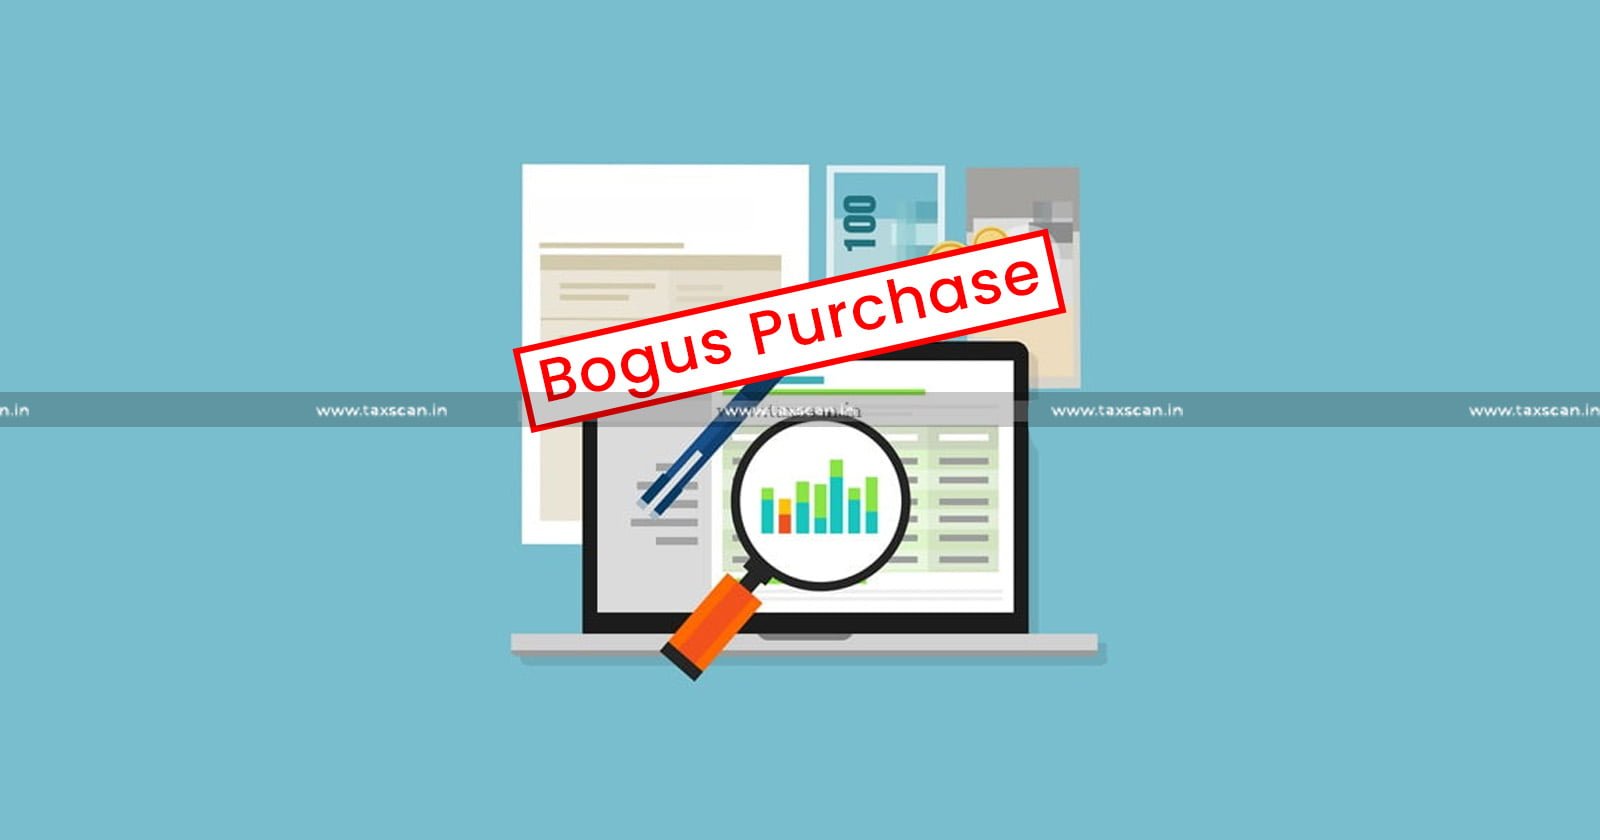 Purchase - Purchase and Sale of Shares Transactions - bogus - Documentary Evidence - taxscan